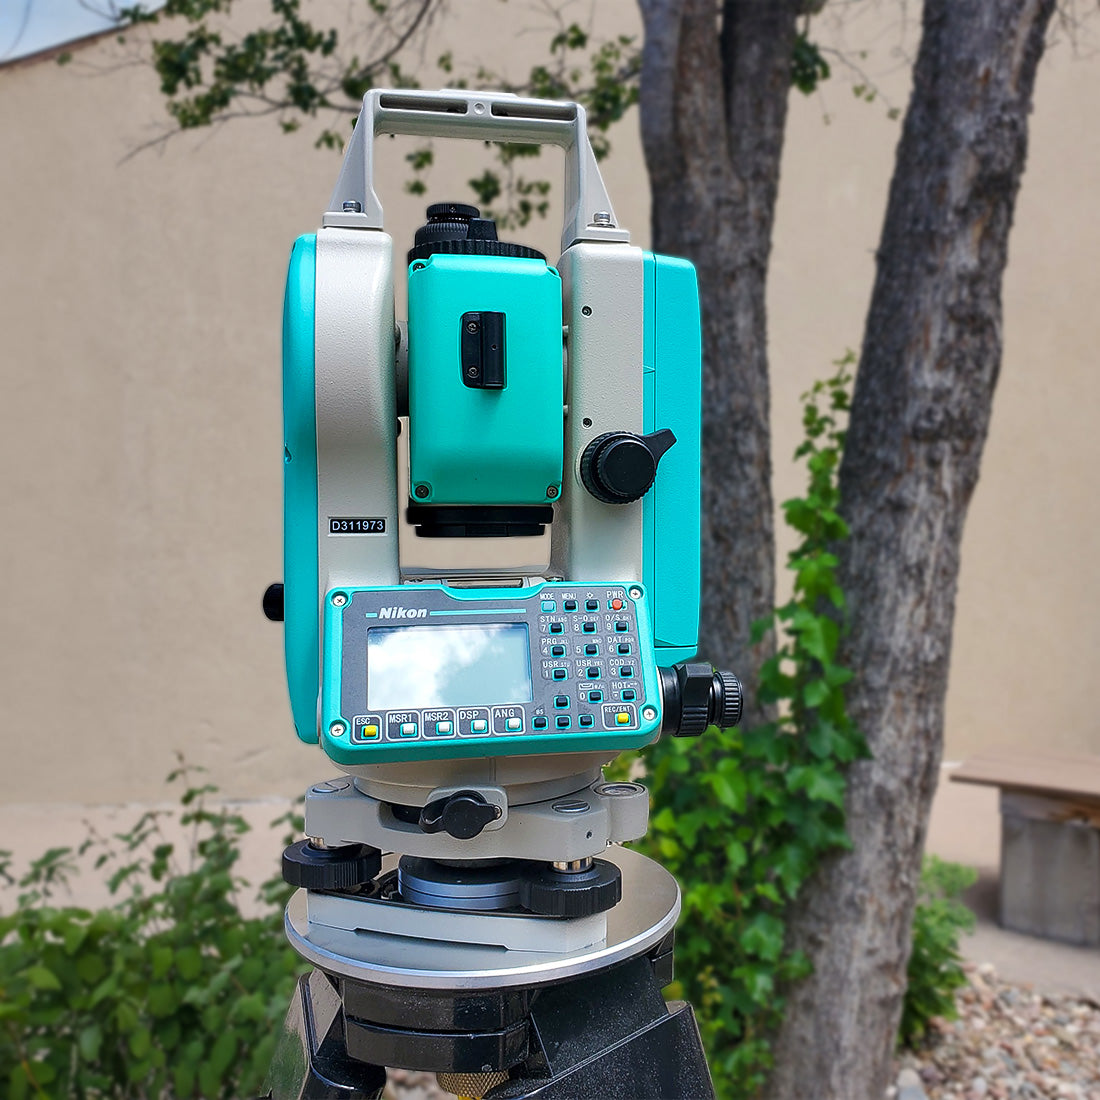 USED NPL-322+ 5" Dual Axis Total Station